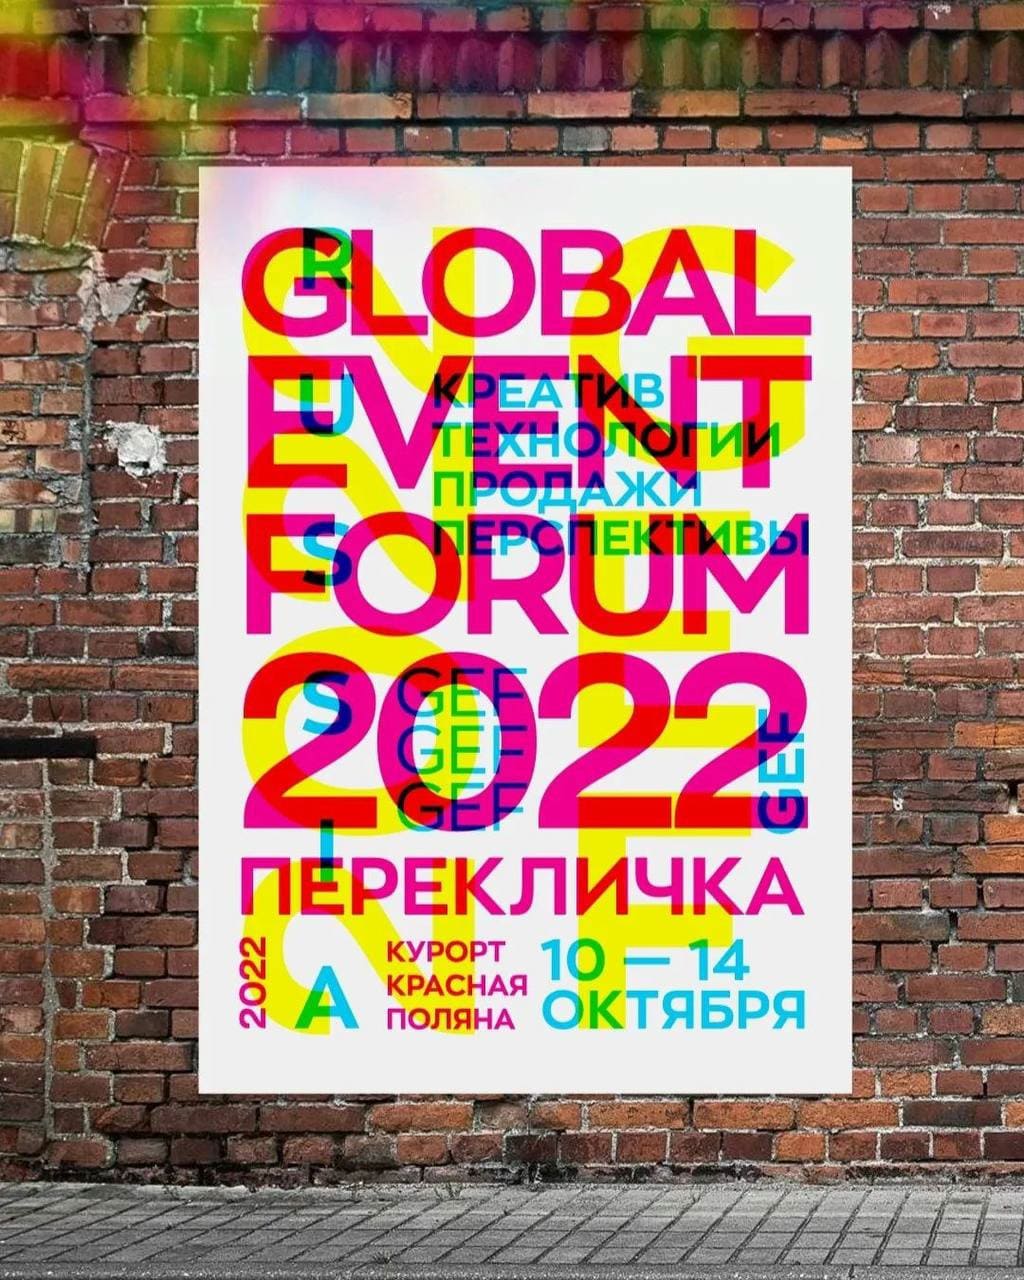 GLOBAL EVENT FORUM